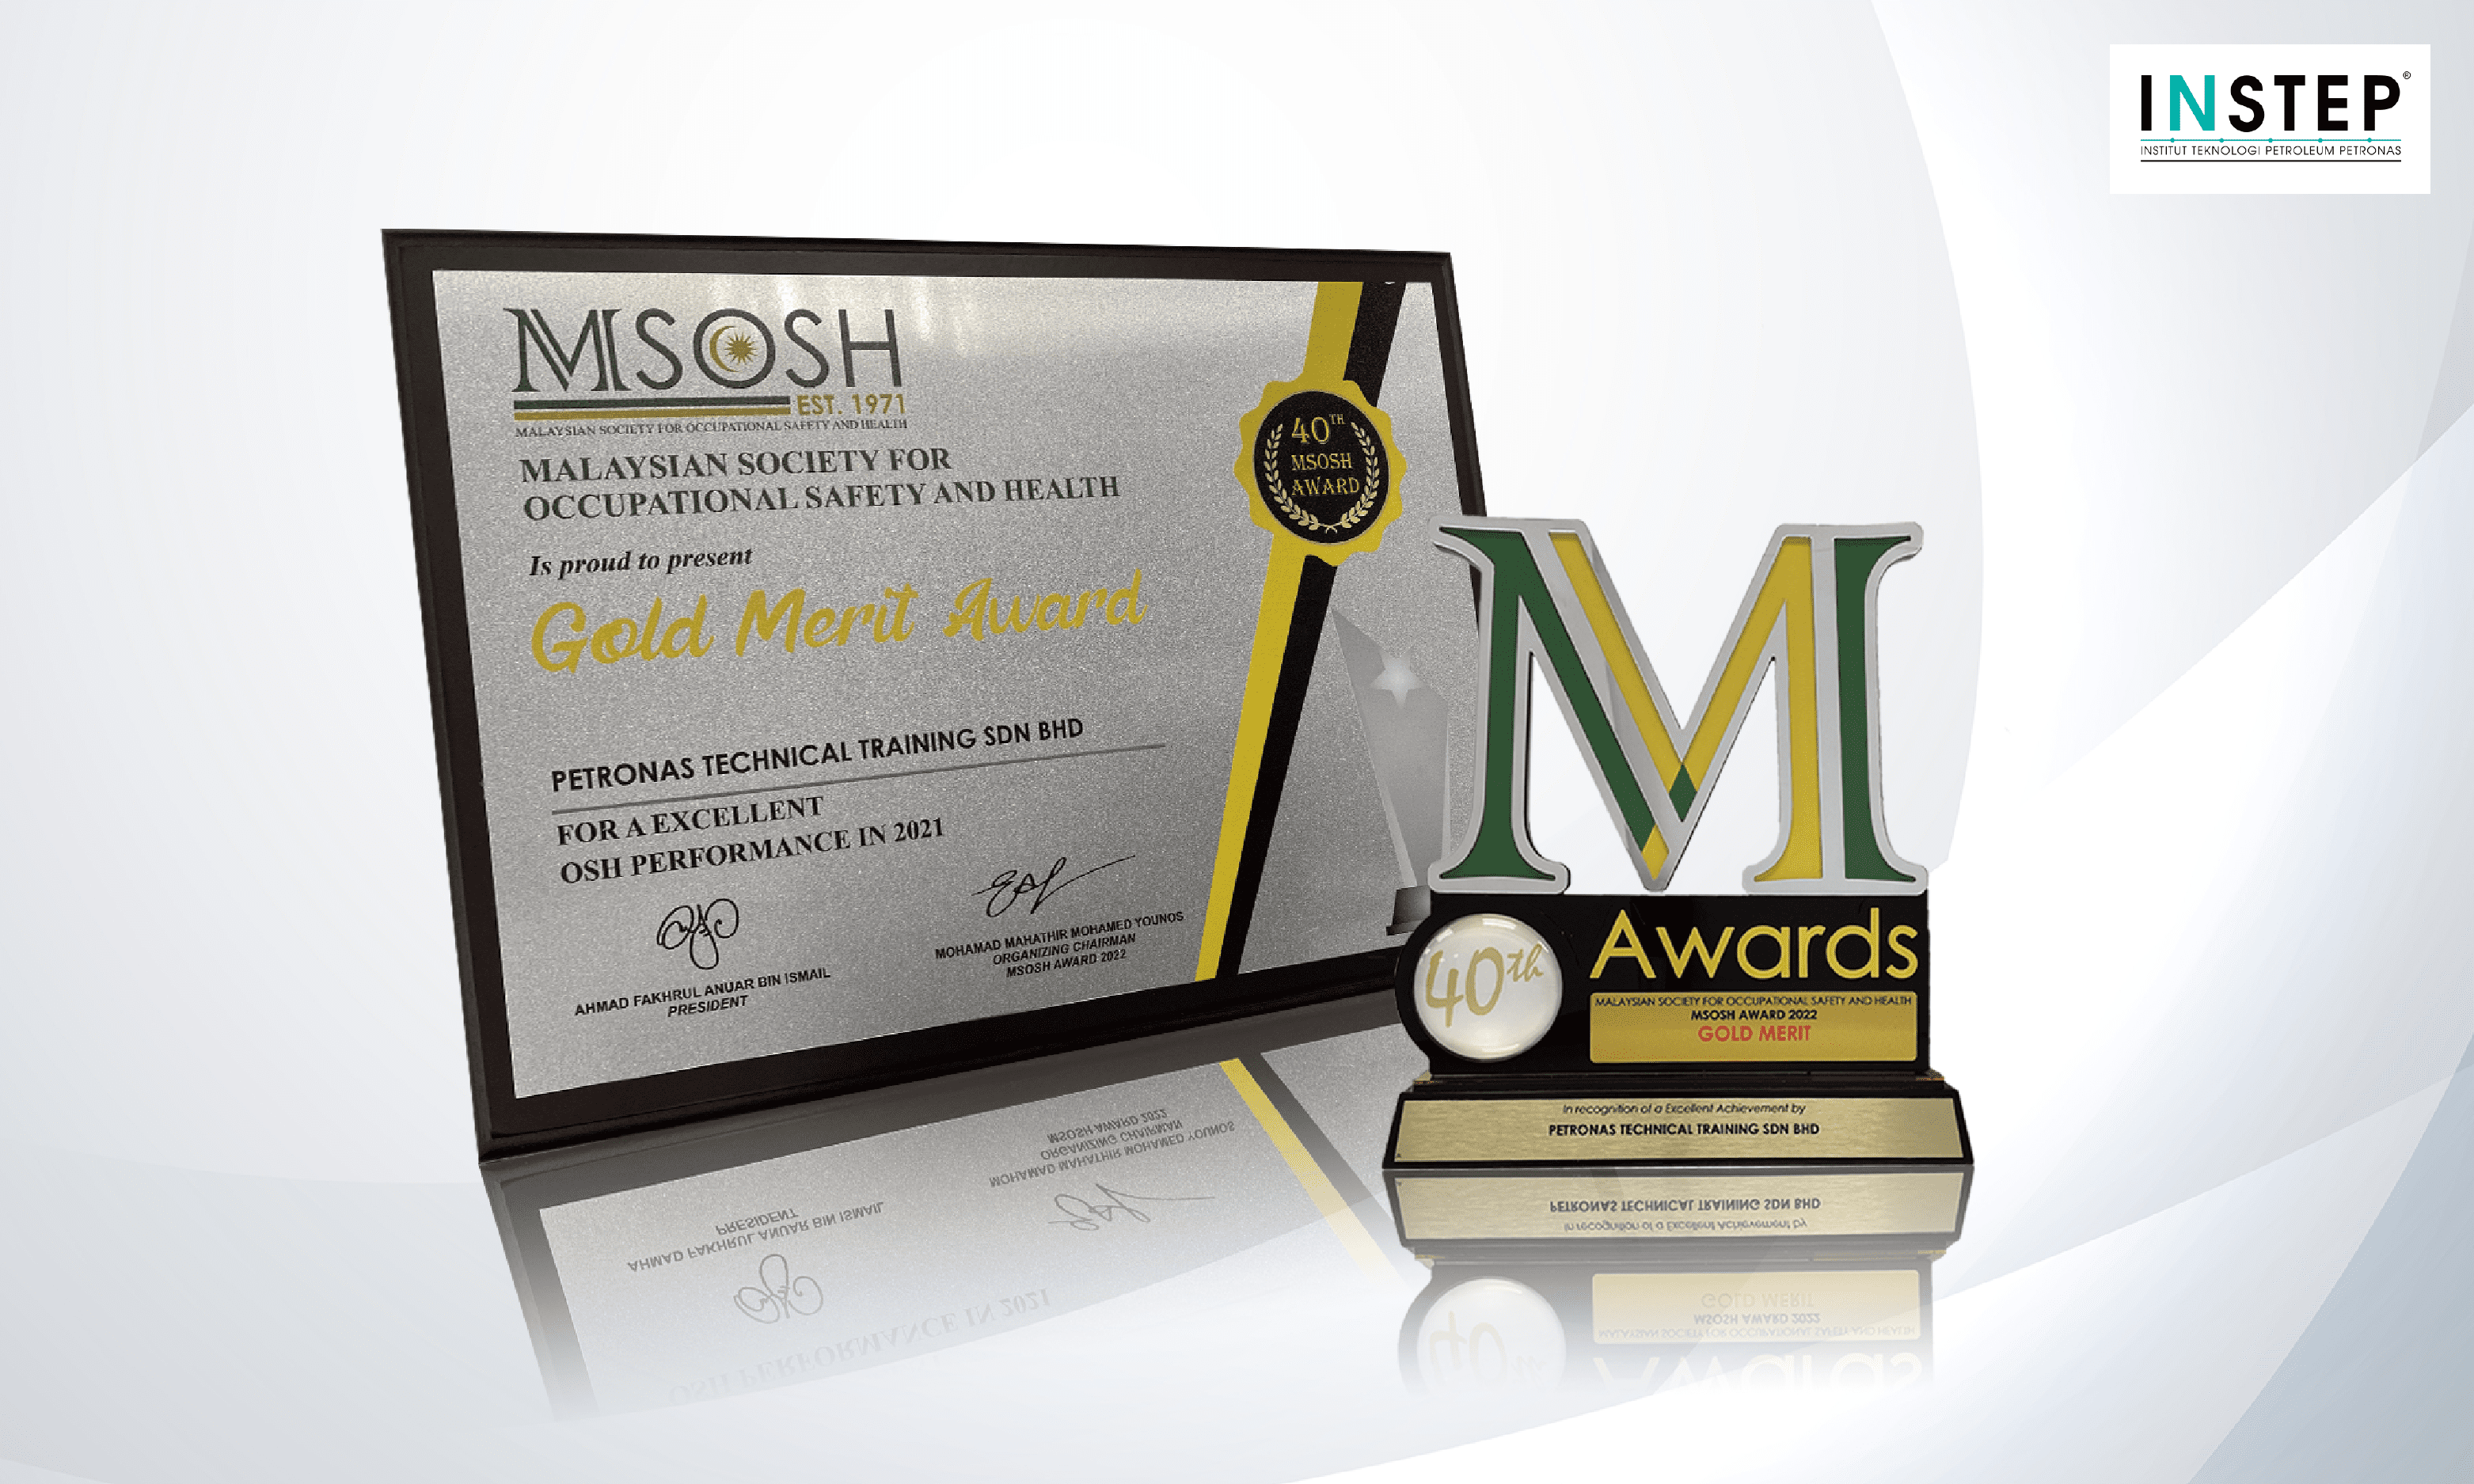 INSTEP Secured MSOSH Gold Merit Award after Three Years of Bagging Gold Award